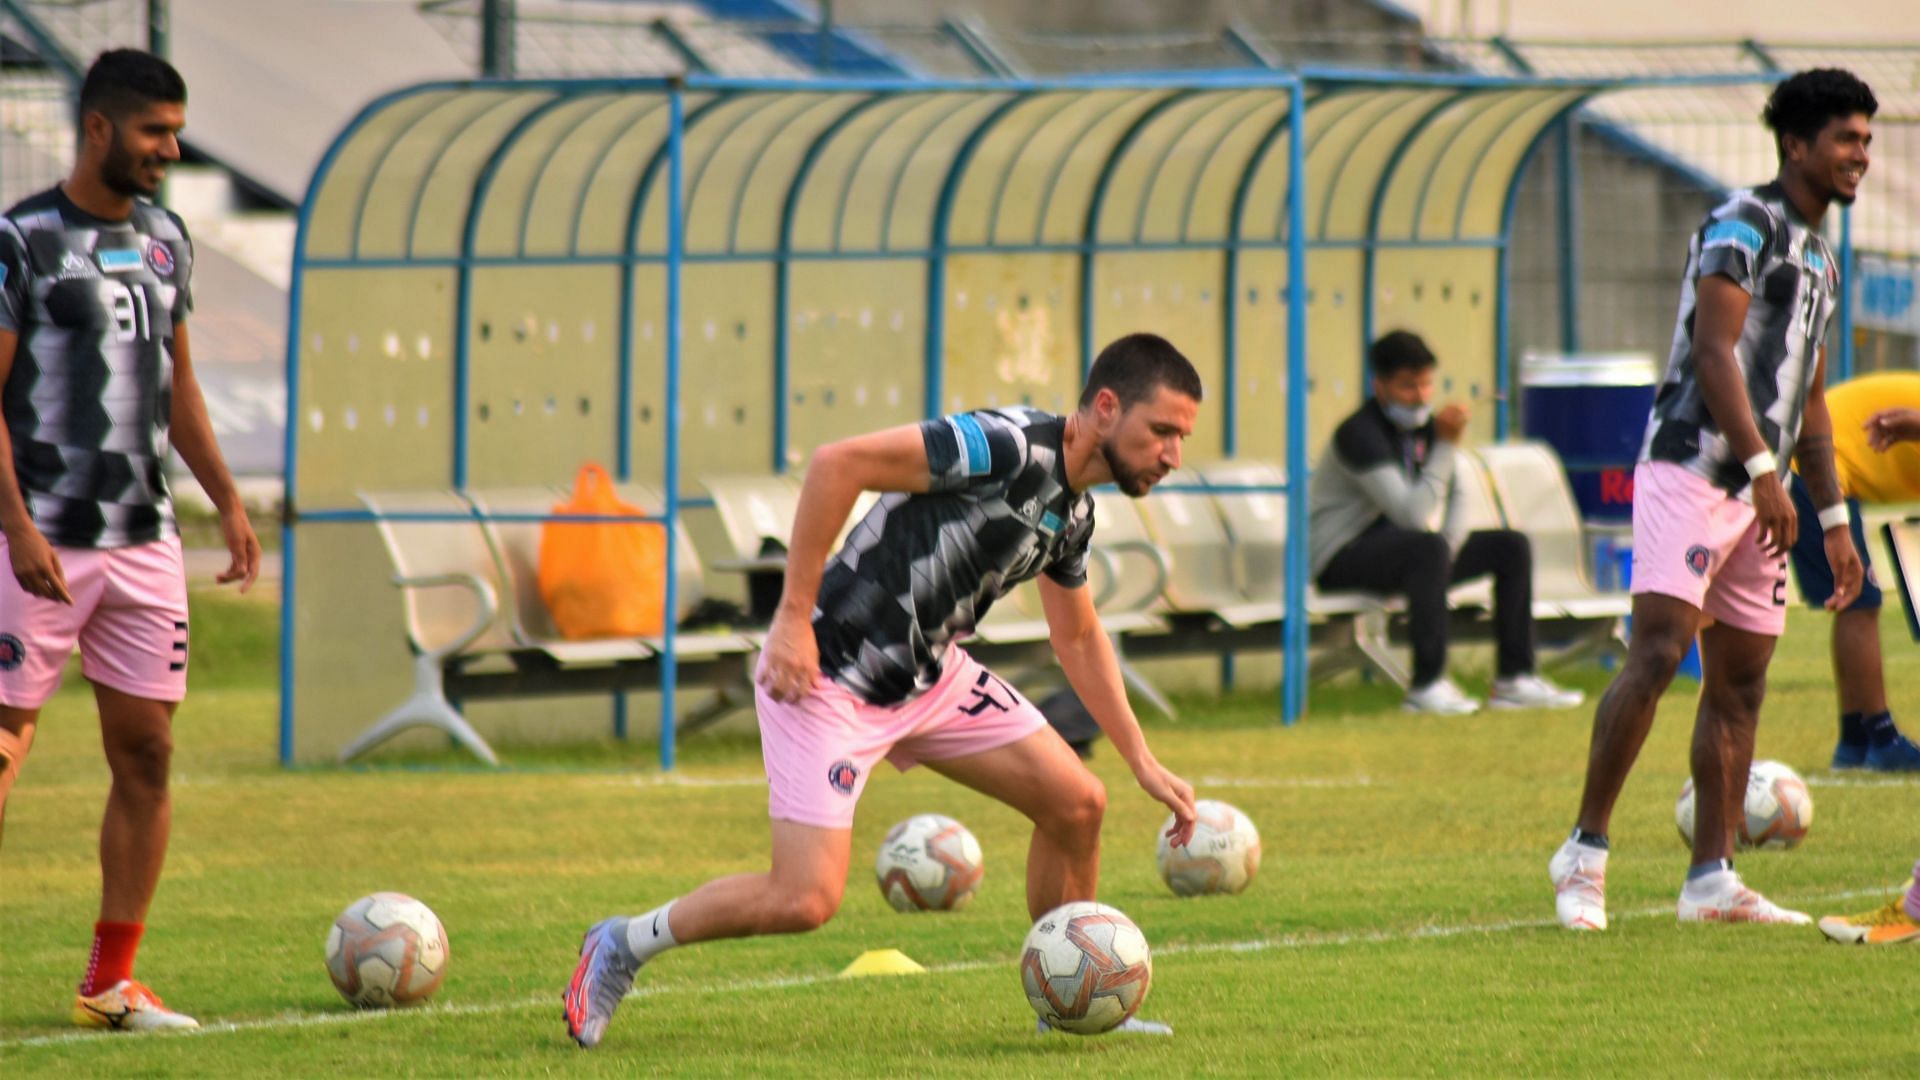 Rajasthan United FC will look to make the most of the Championship Stage opportunity (Image credits: I-league Media)